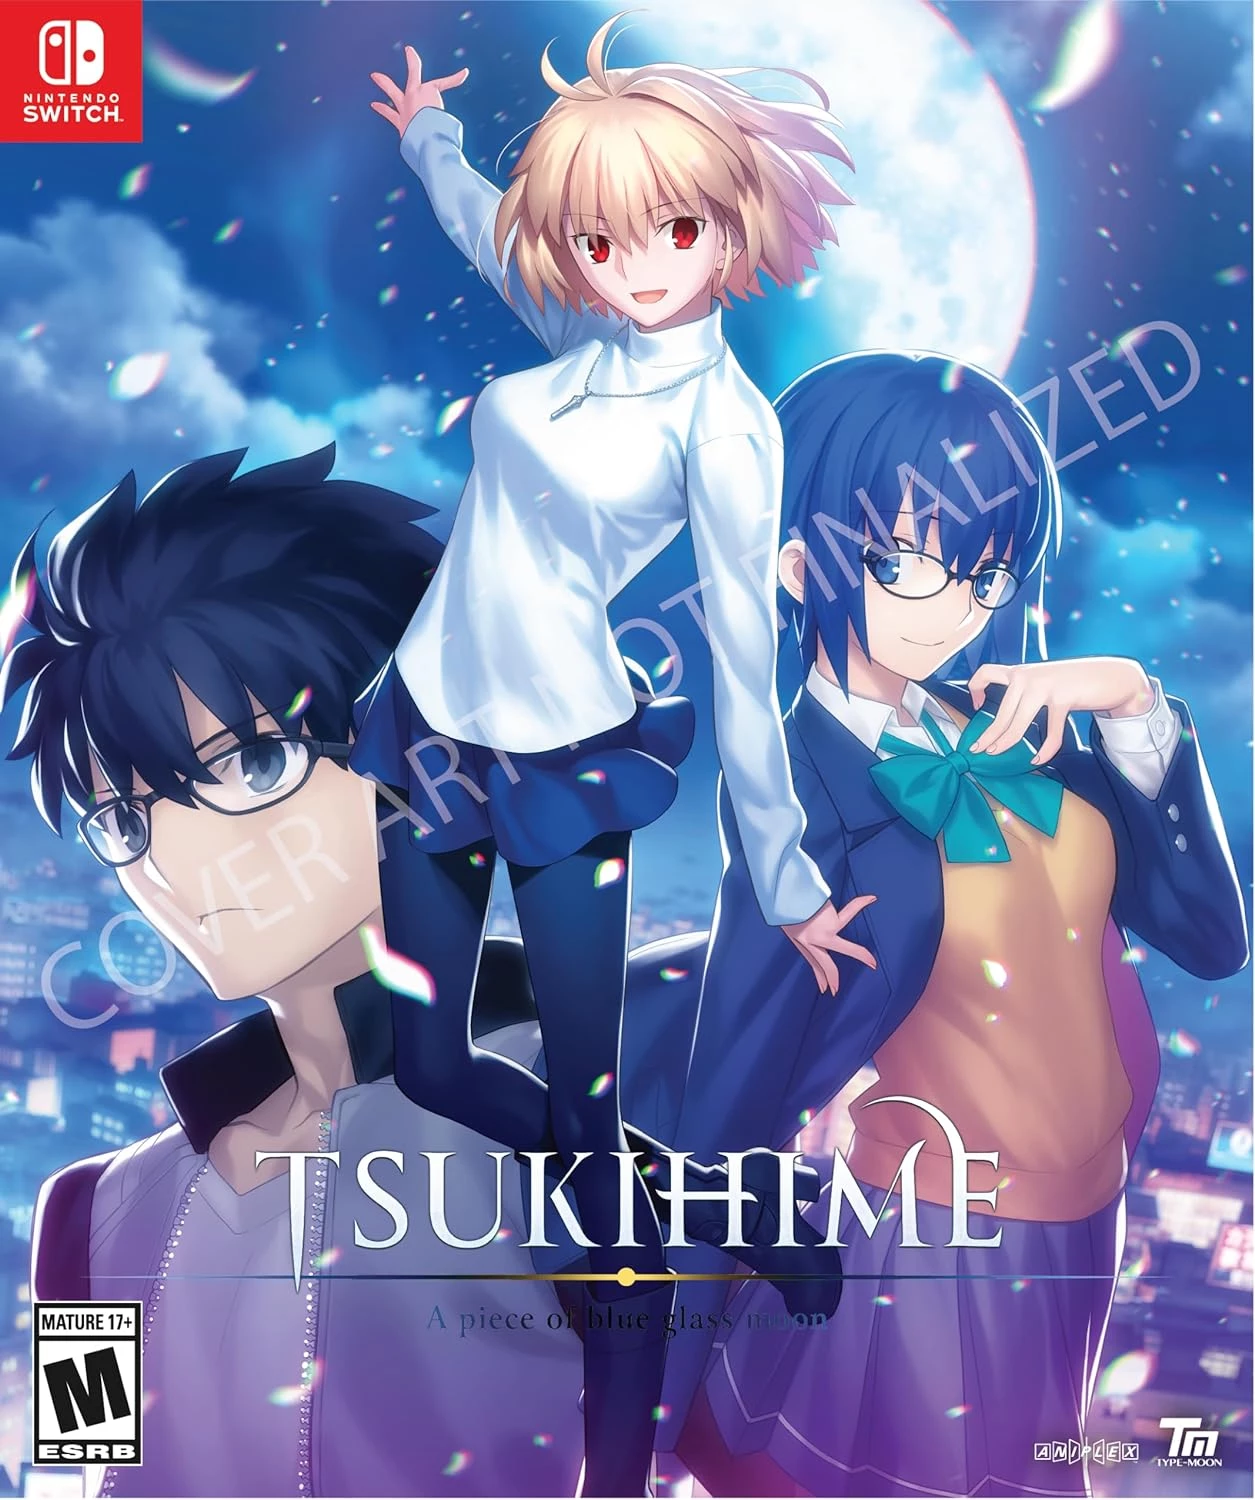 Tsukihime: A Piece of Blue Glass Moon - Limited Edition (USA Import) (Switch), Aniplex